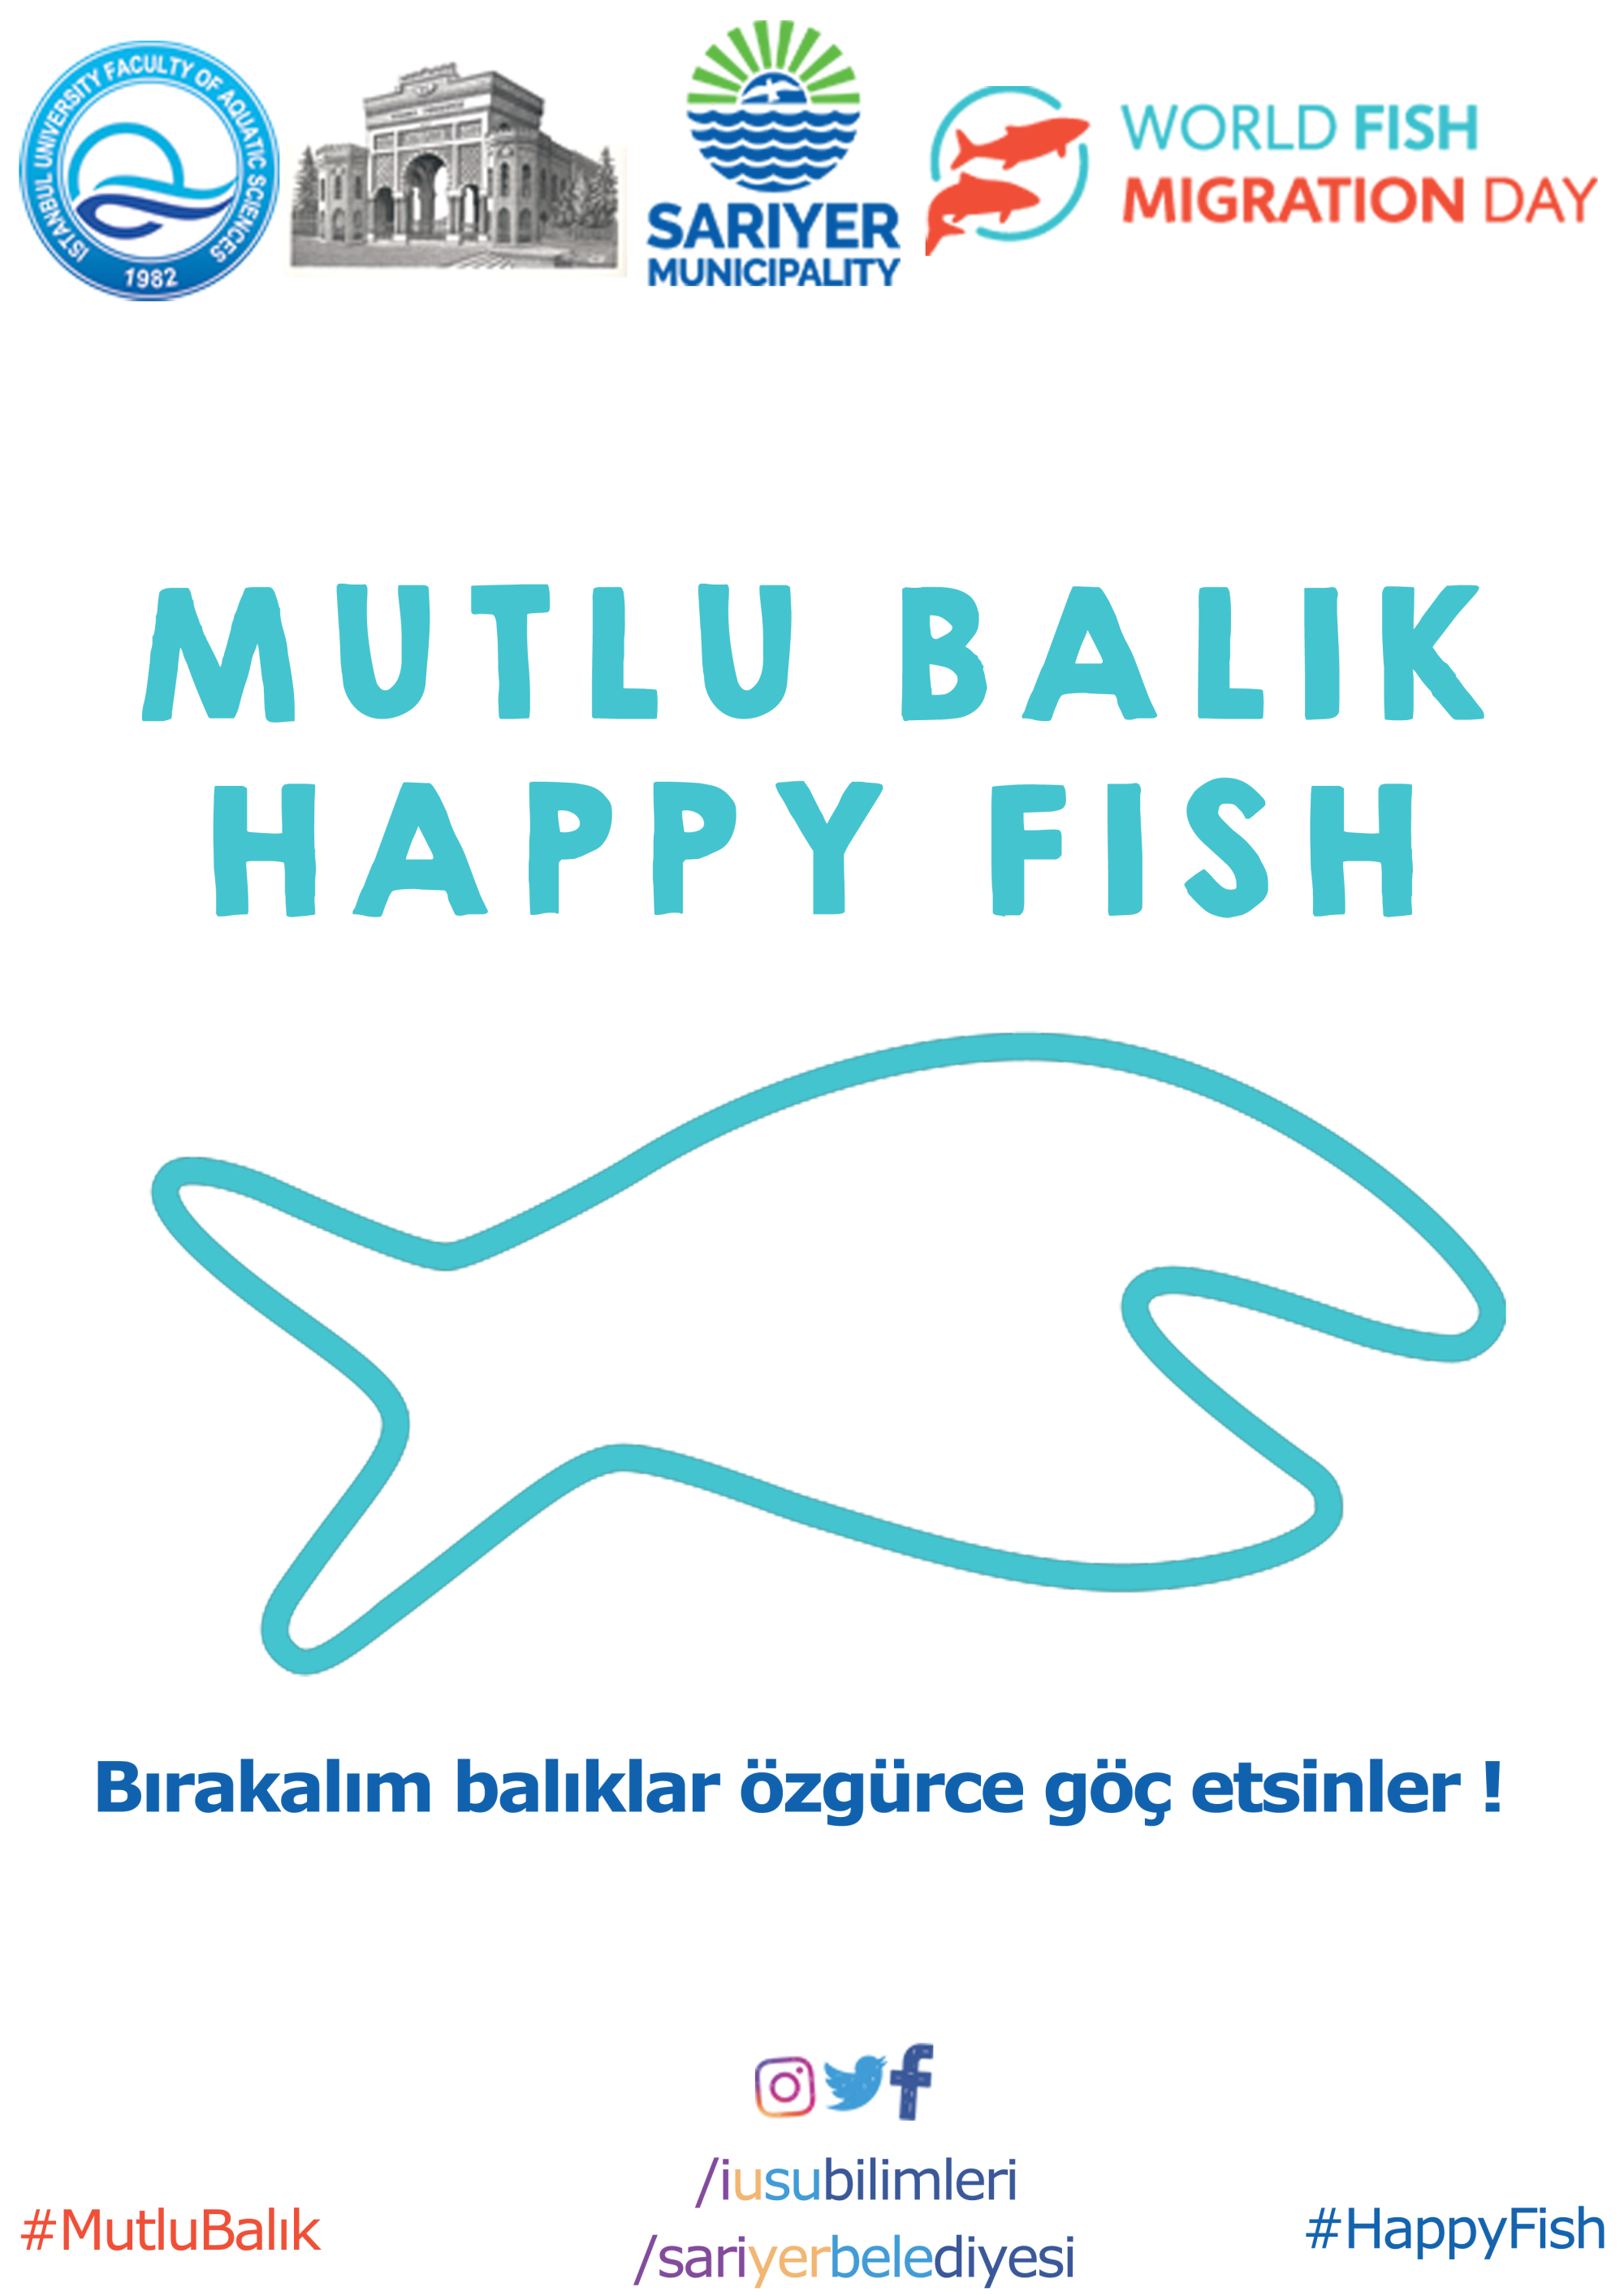 Istanbul University Faculty of Aquatic Sciences and Sariyer Municipality celebrating WFMD!